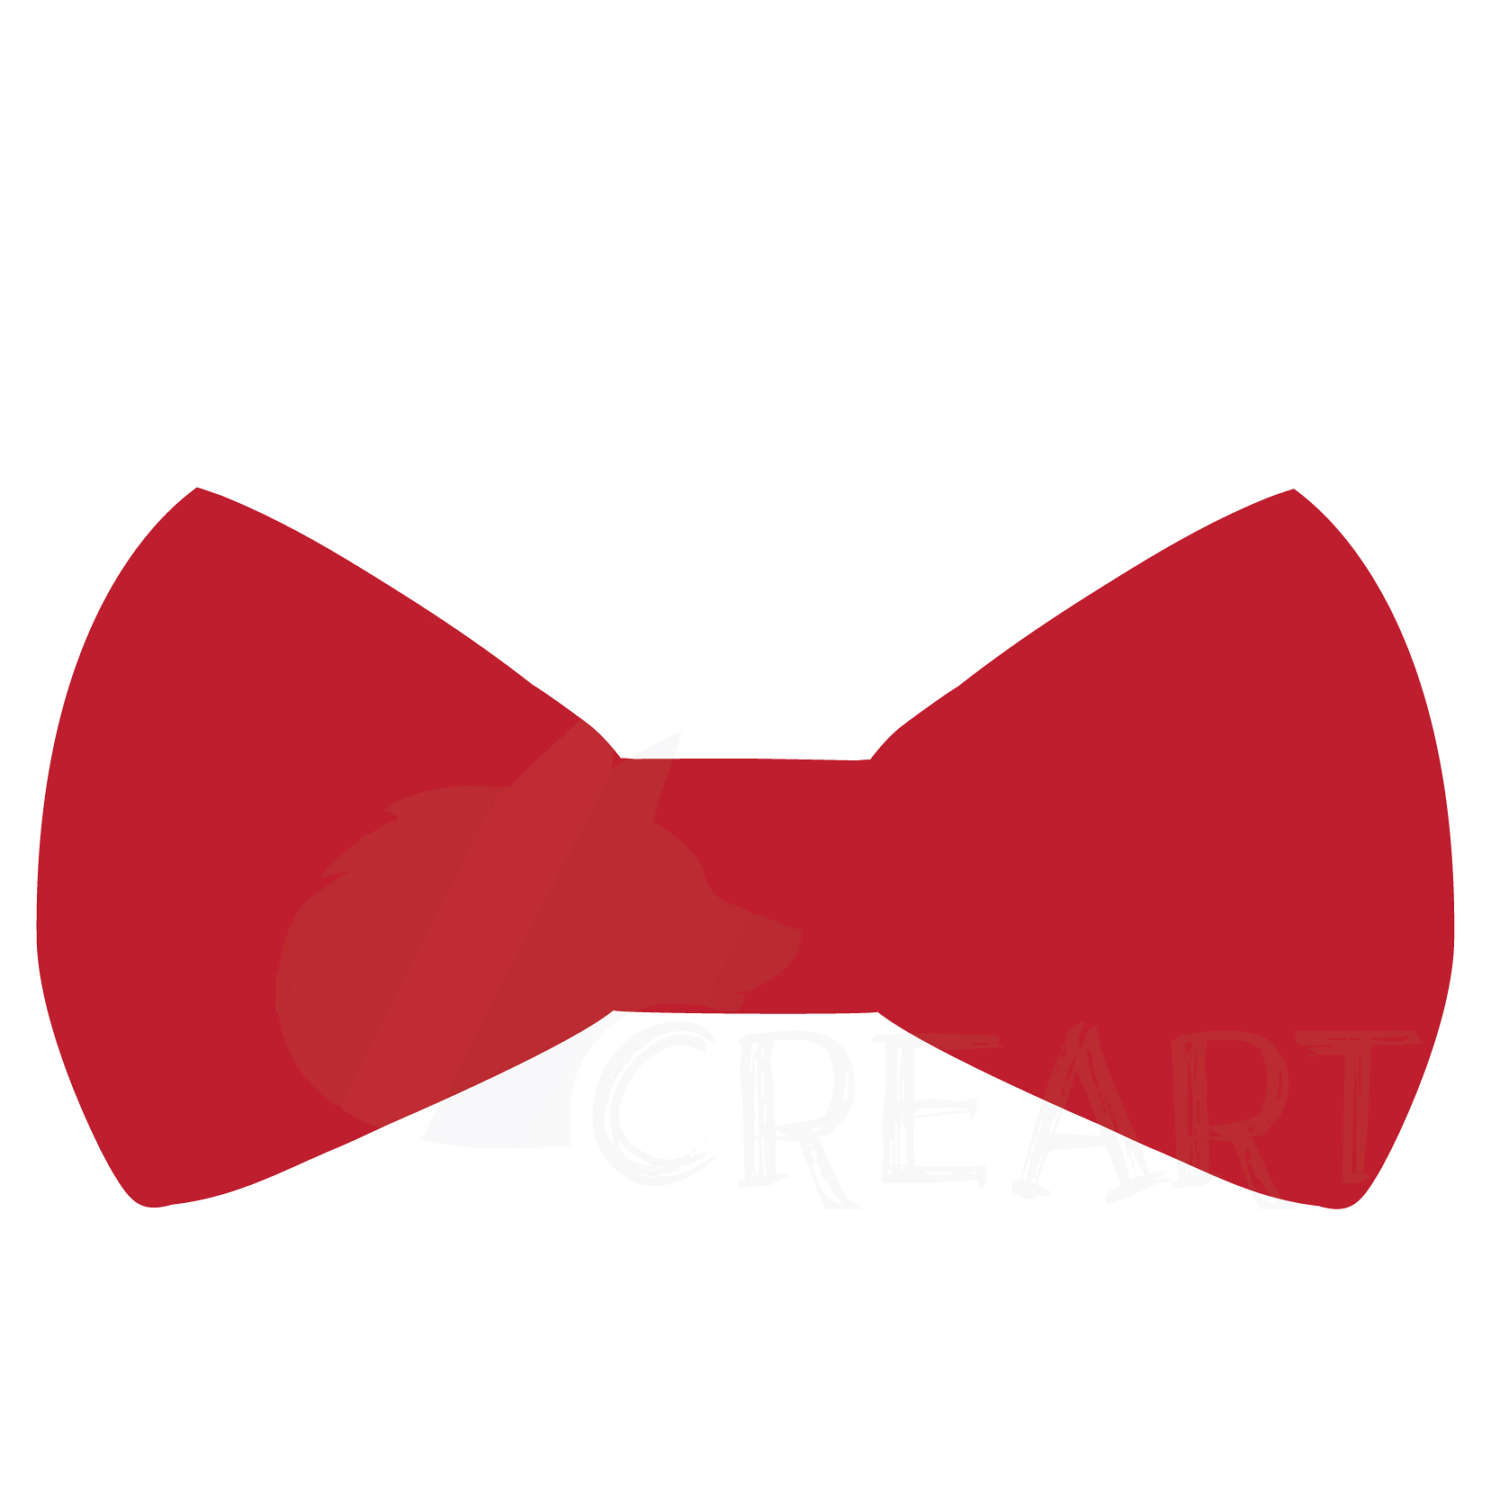 Red bow tie clipart » Clipart Station.